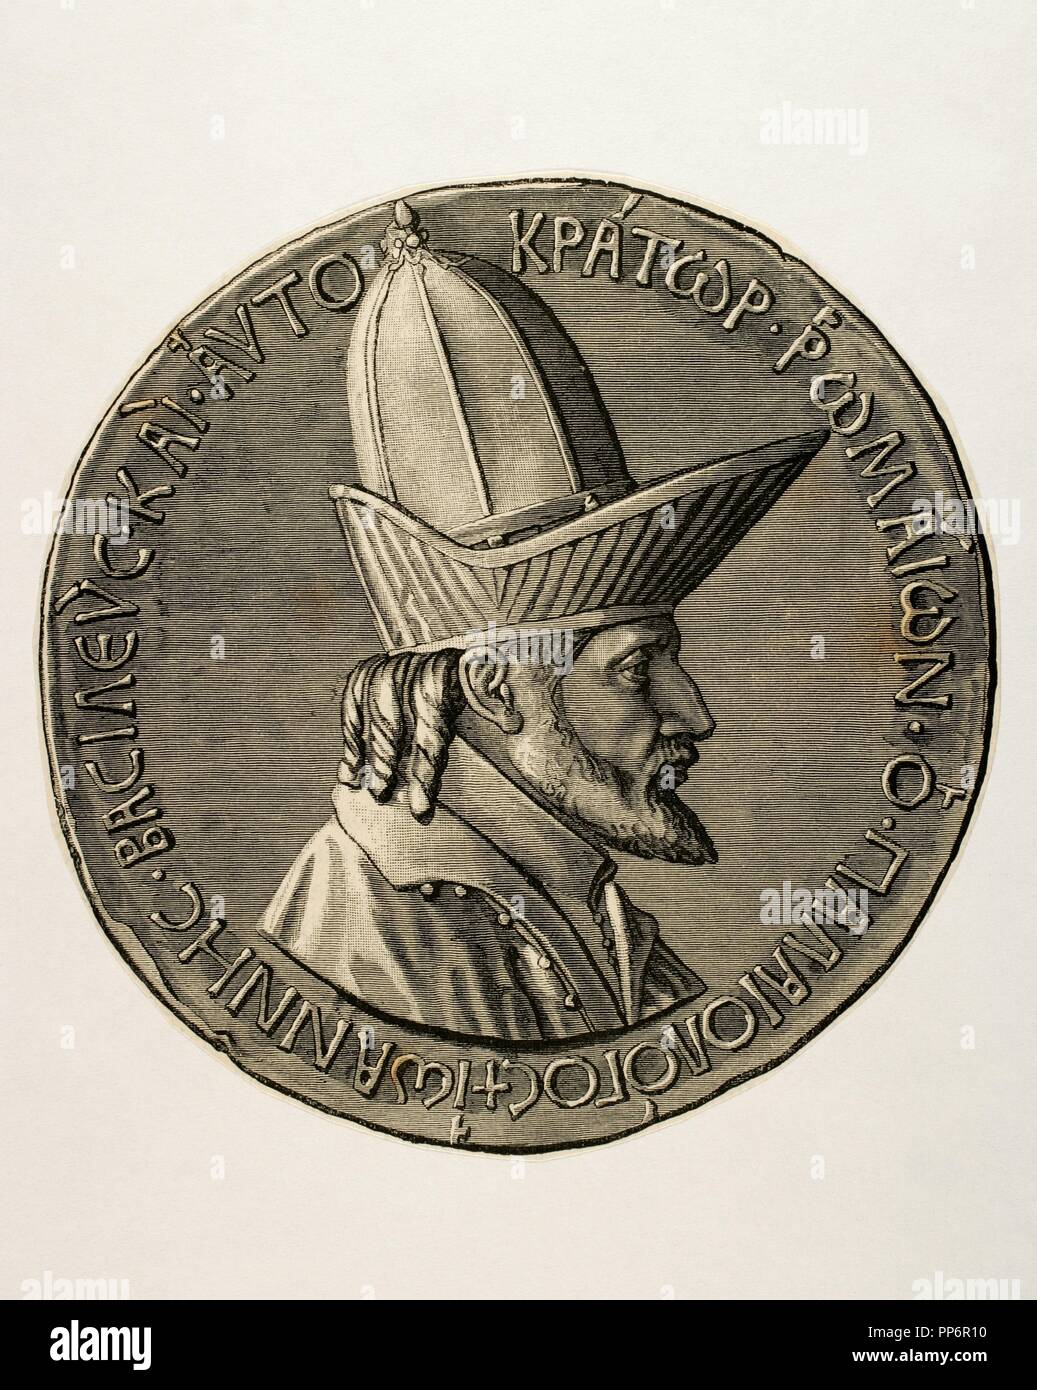 John VIII Palaiologos or Palaeologus (1392-1448). Penultimate reigning Byzantine Emperor, ruling from 1425 to 1448. Engraving. Stock Photo